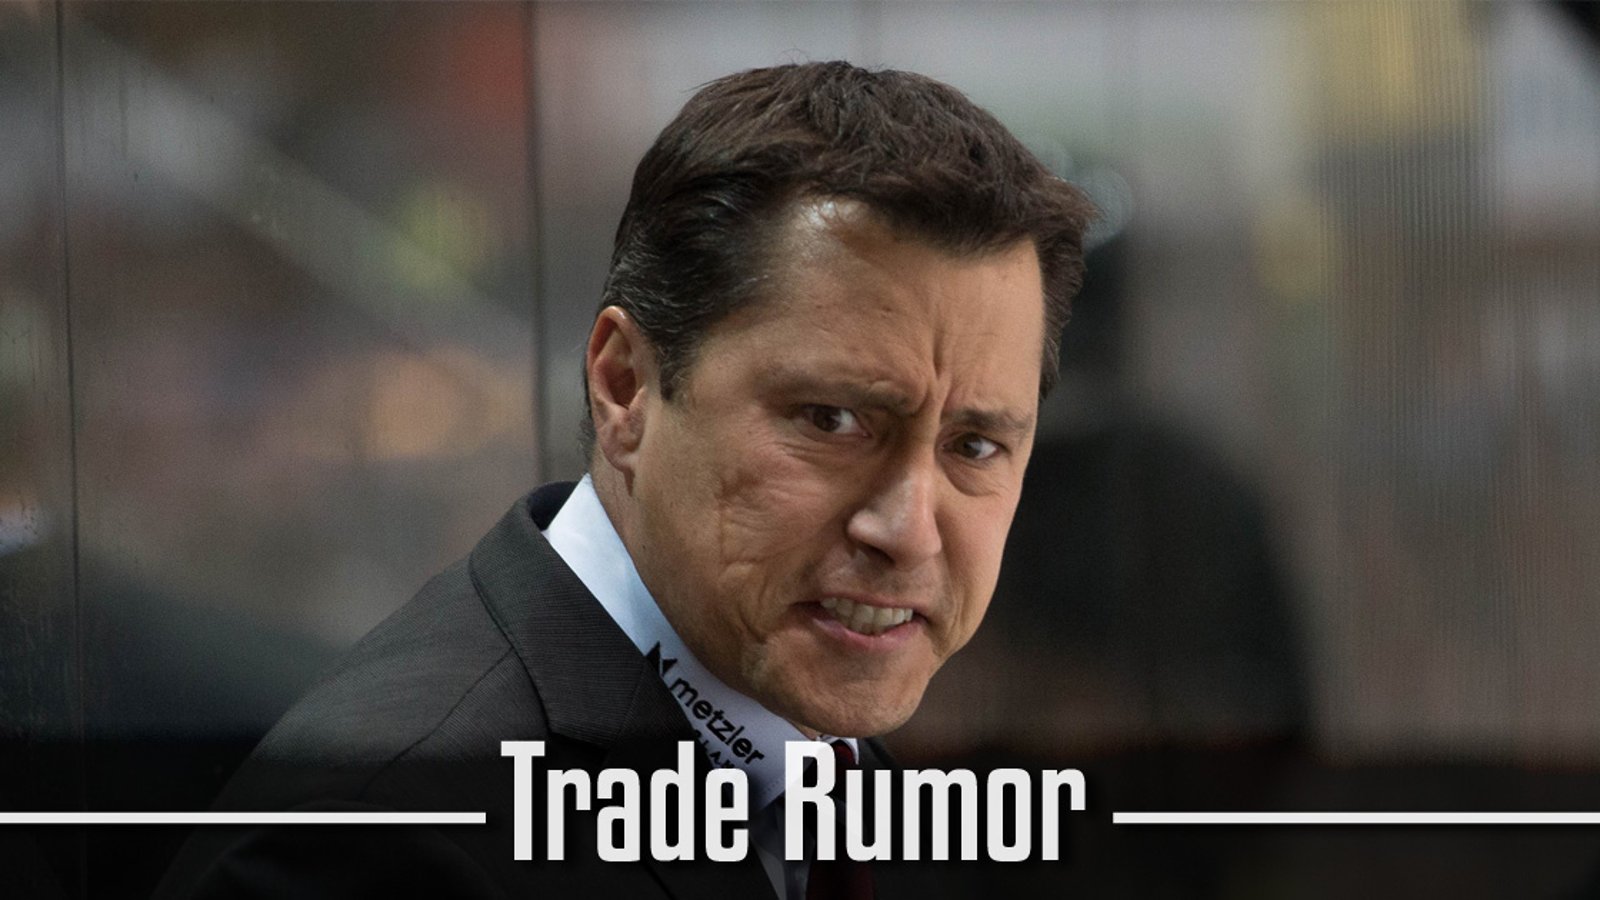 Trade Rumor : Unhappy with his use, veteran player might asks to be traded